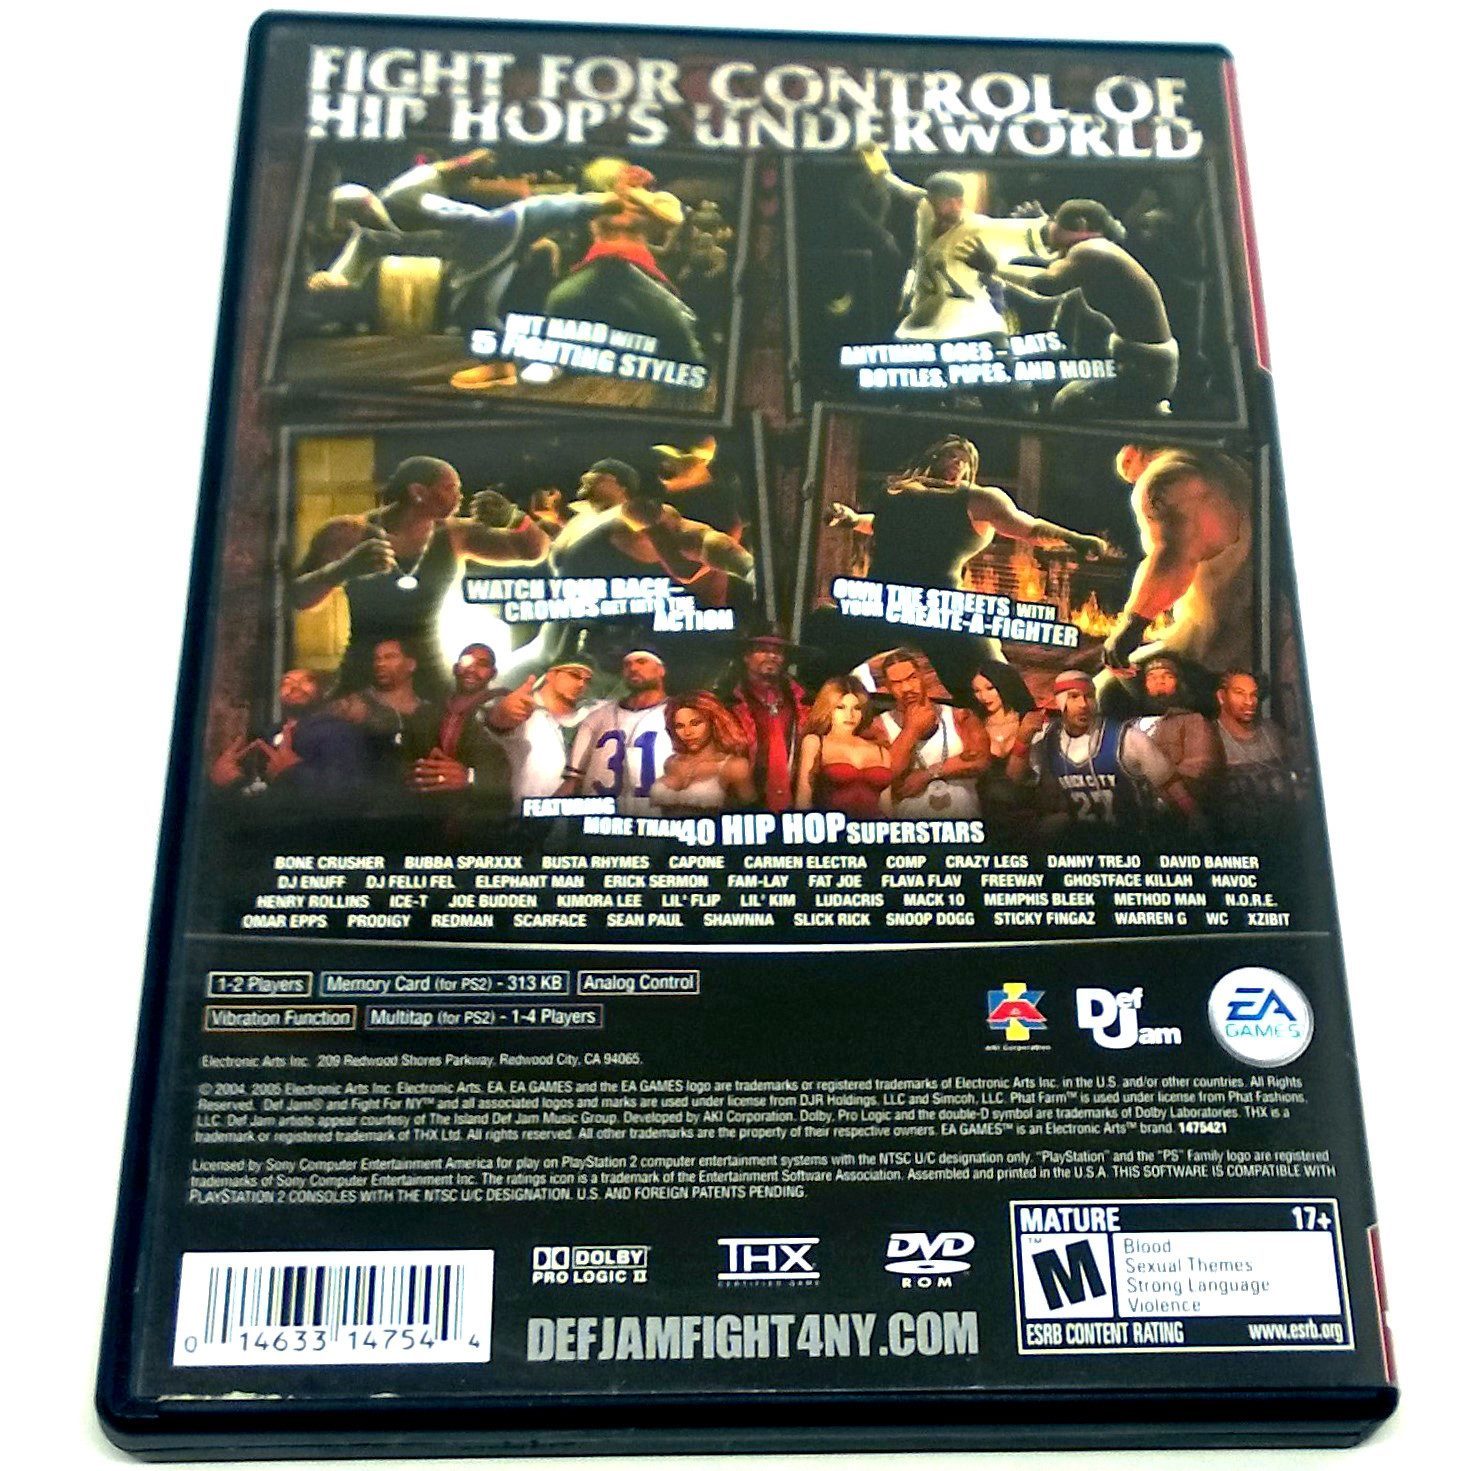 Def Jam - Fight For NY [SLUS 21004] (Sony Playstation 2) - Box Scans  (1200DPI) : Electronic Arts : Free Download, Borrow, and Streaming :  Internet Archive